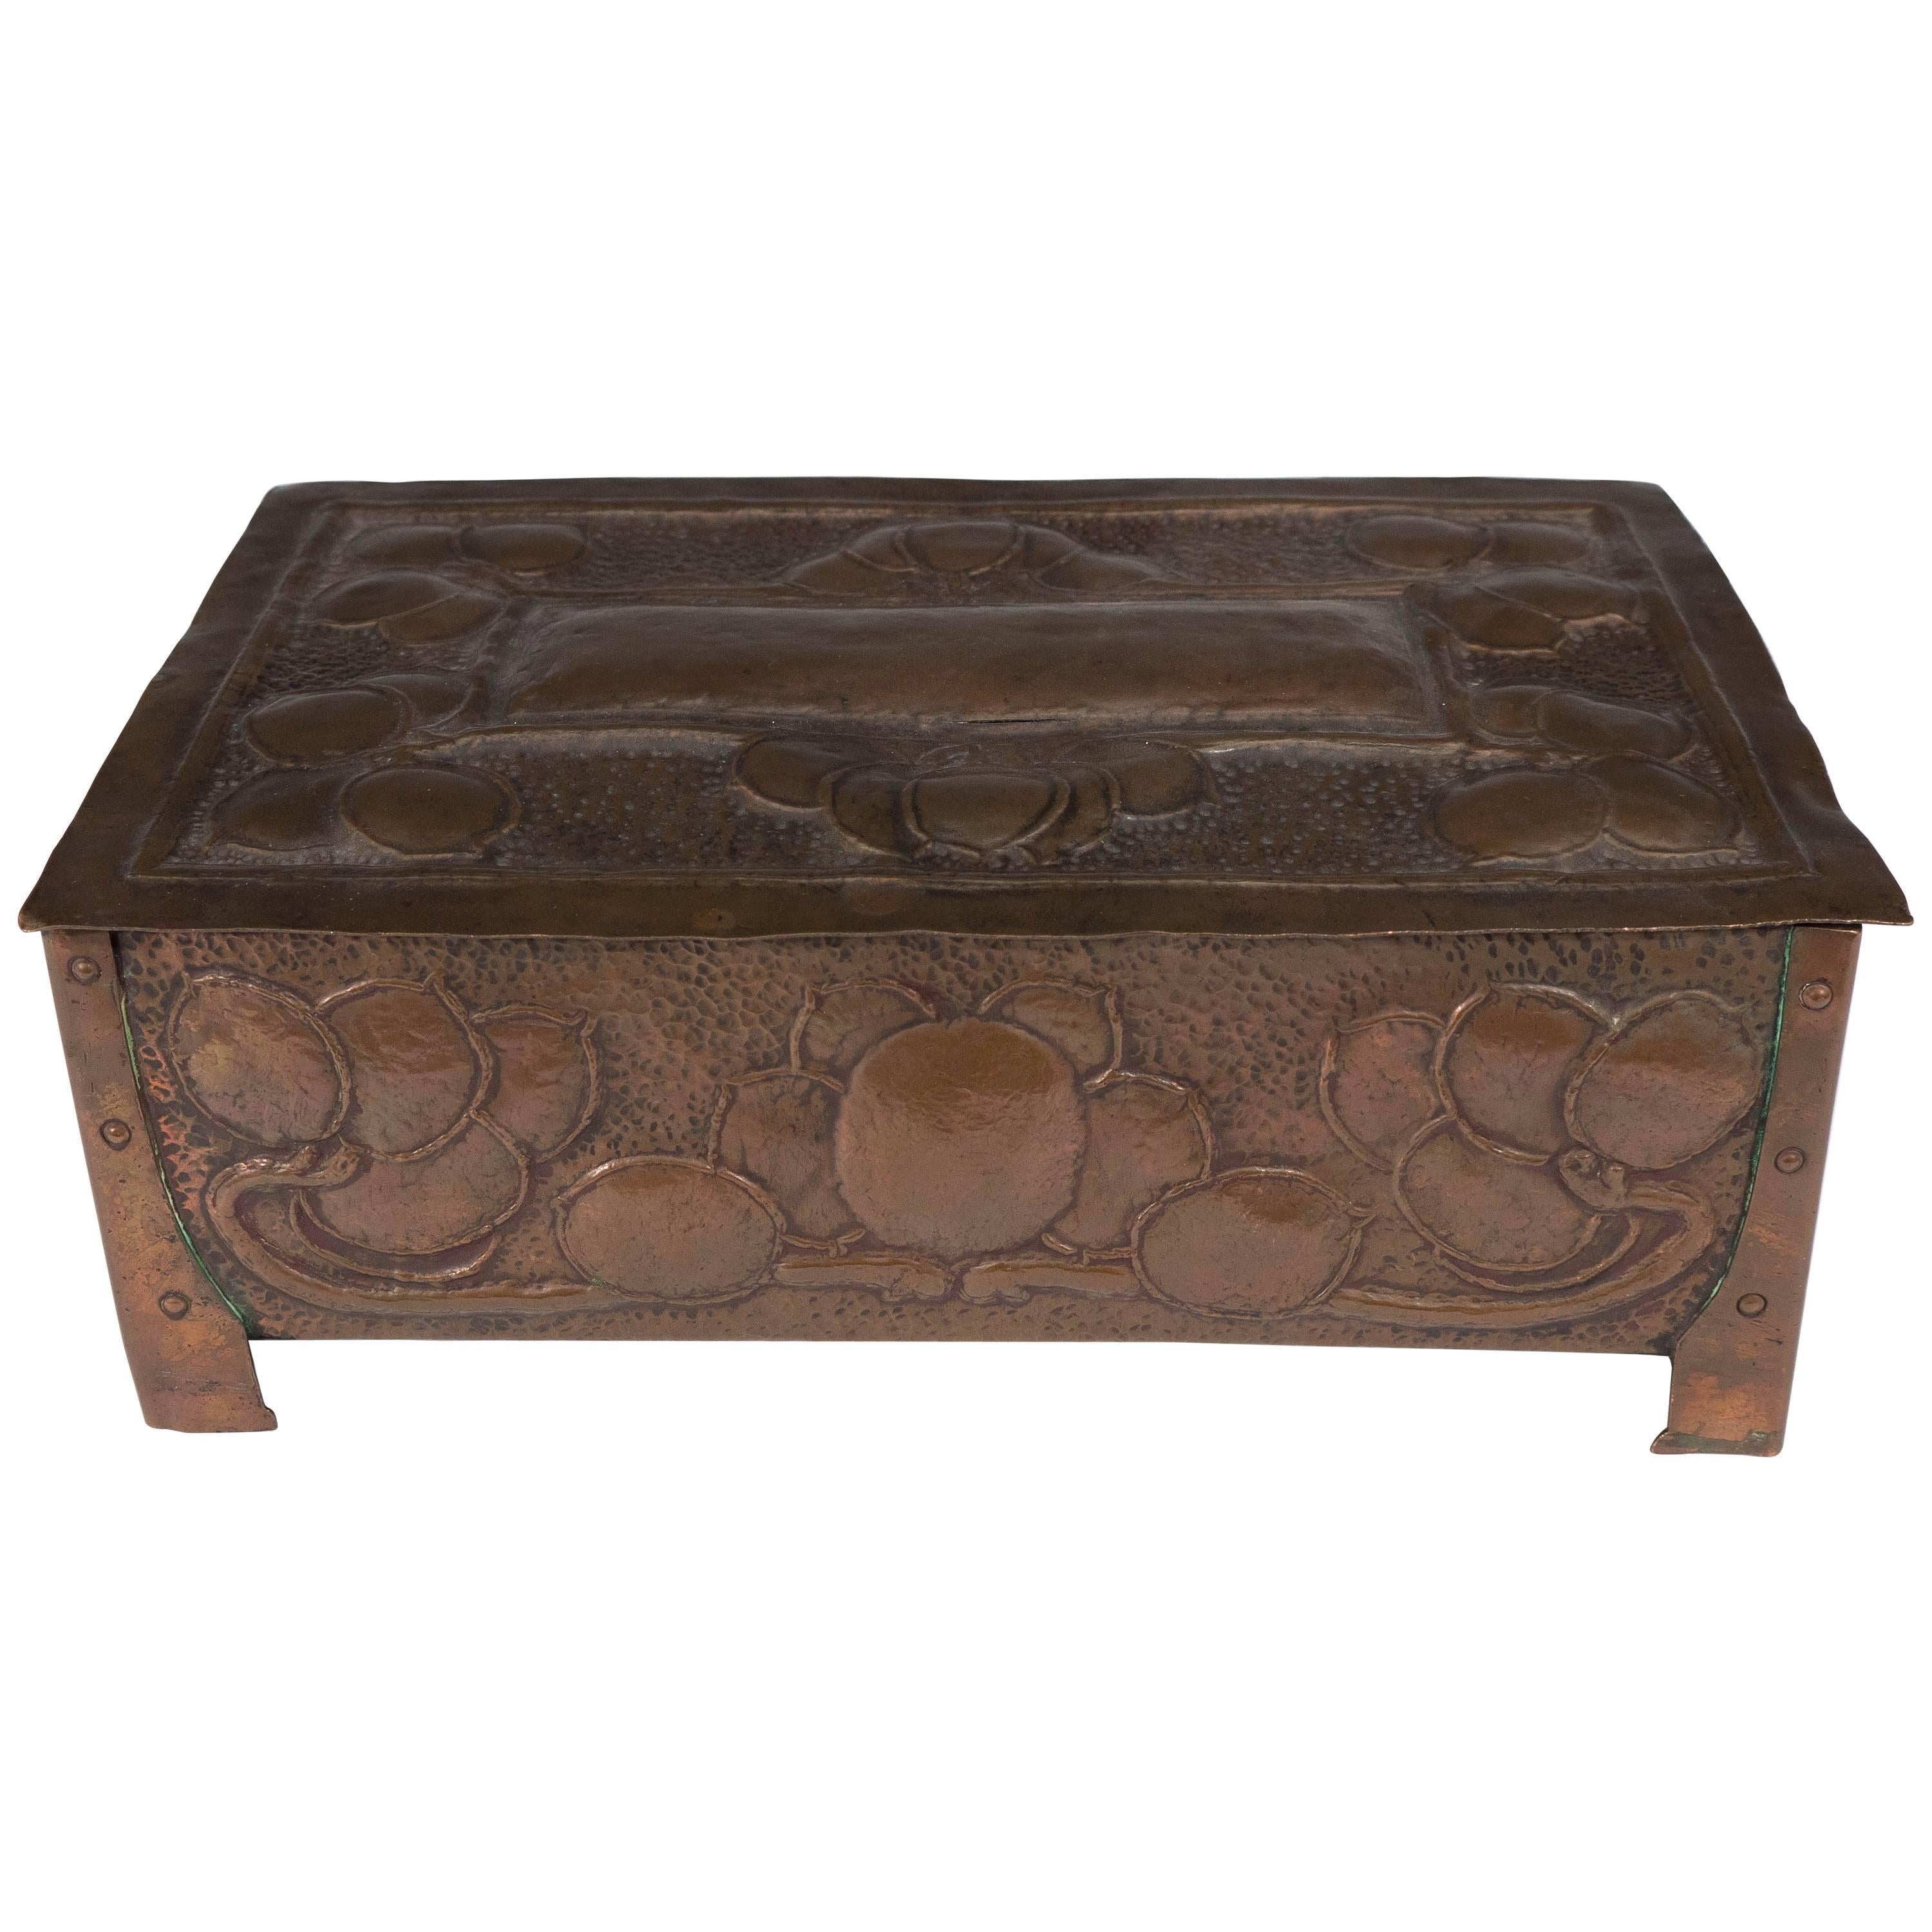 An English Early 20th Century Arts & Crafts Copper Box